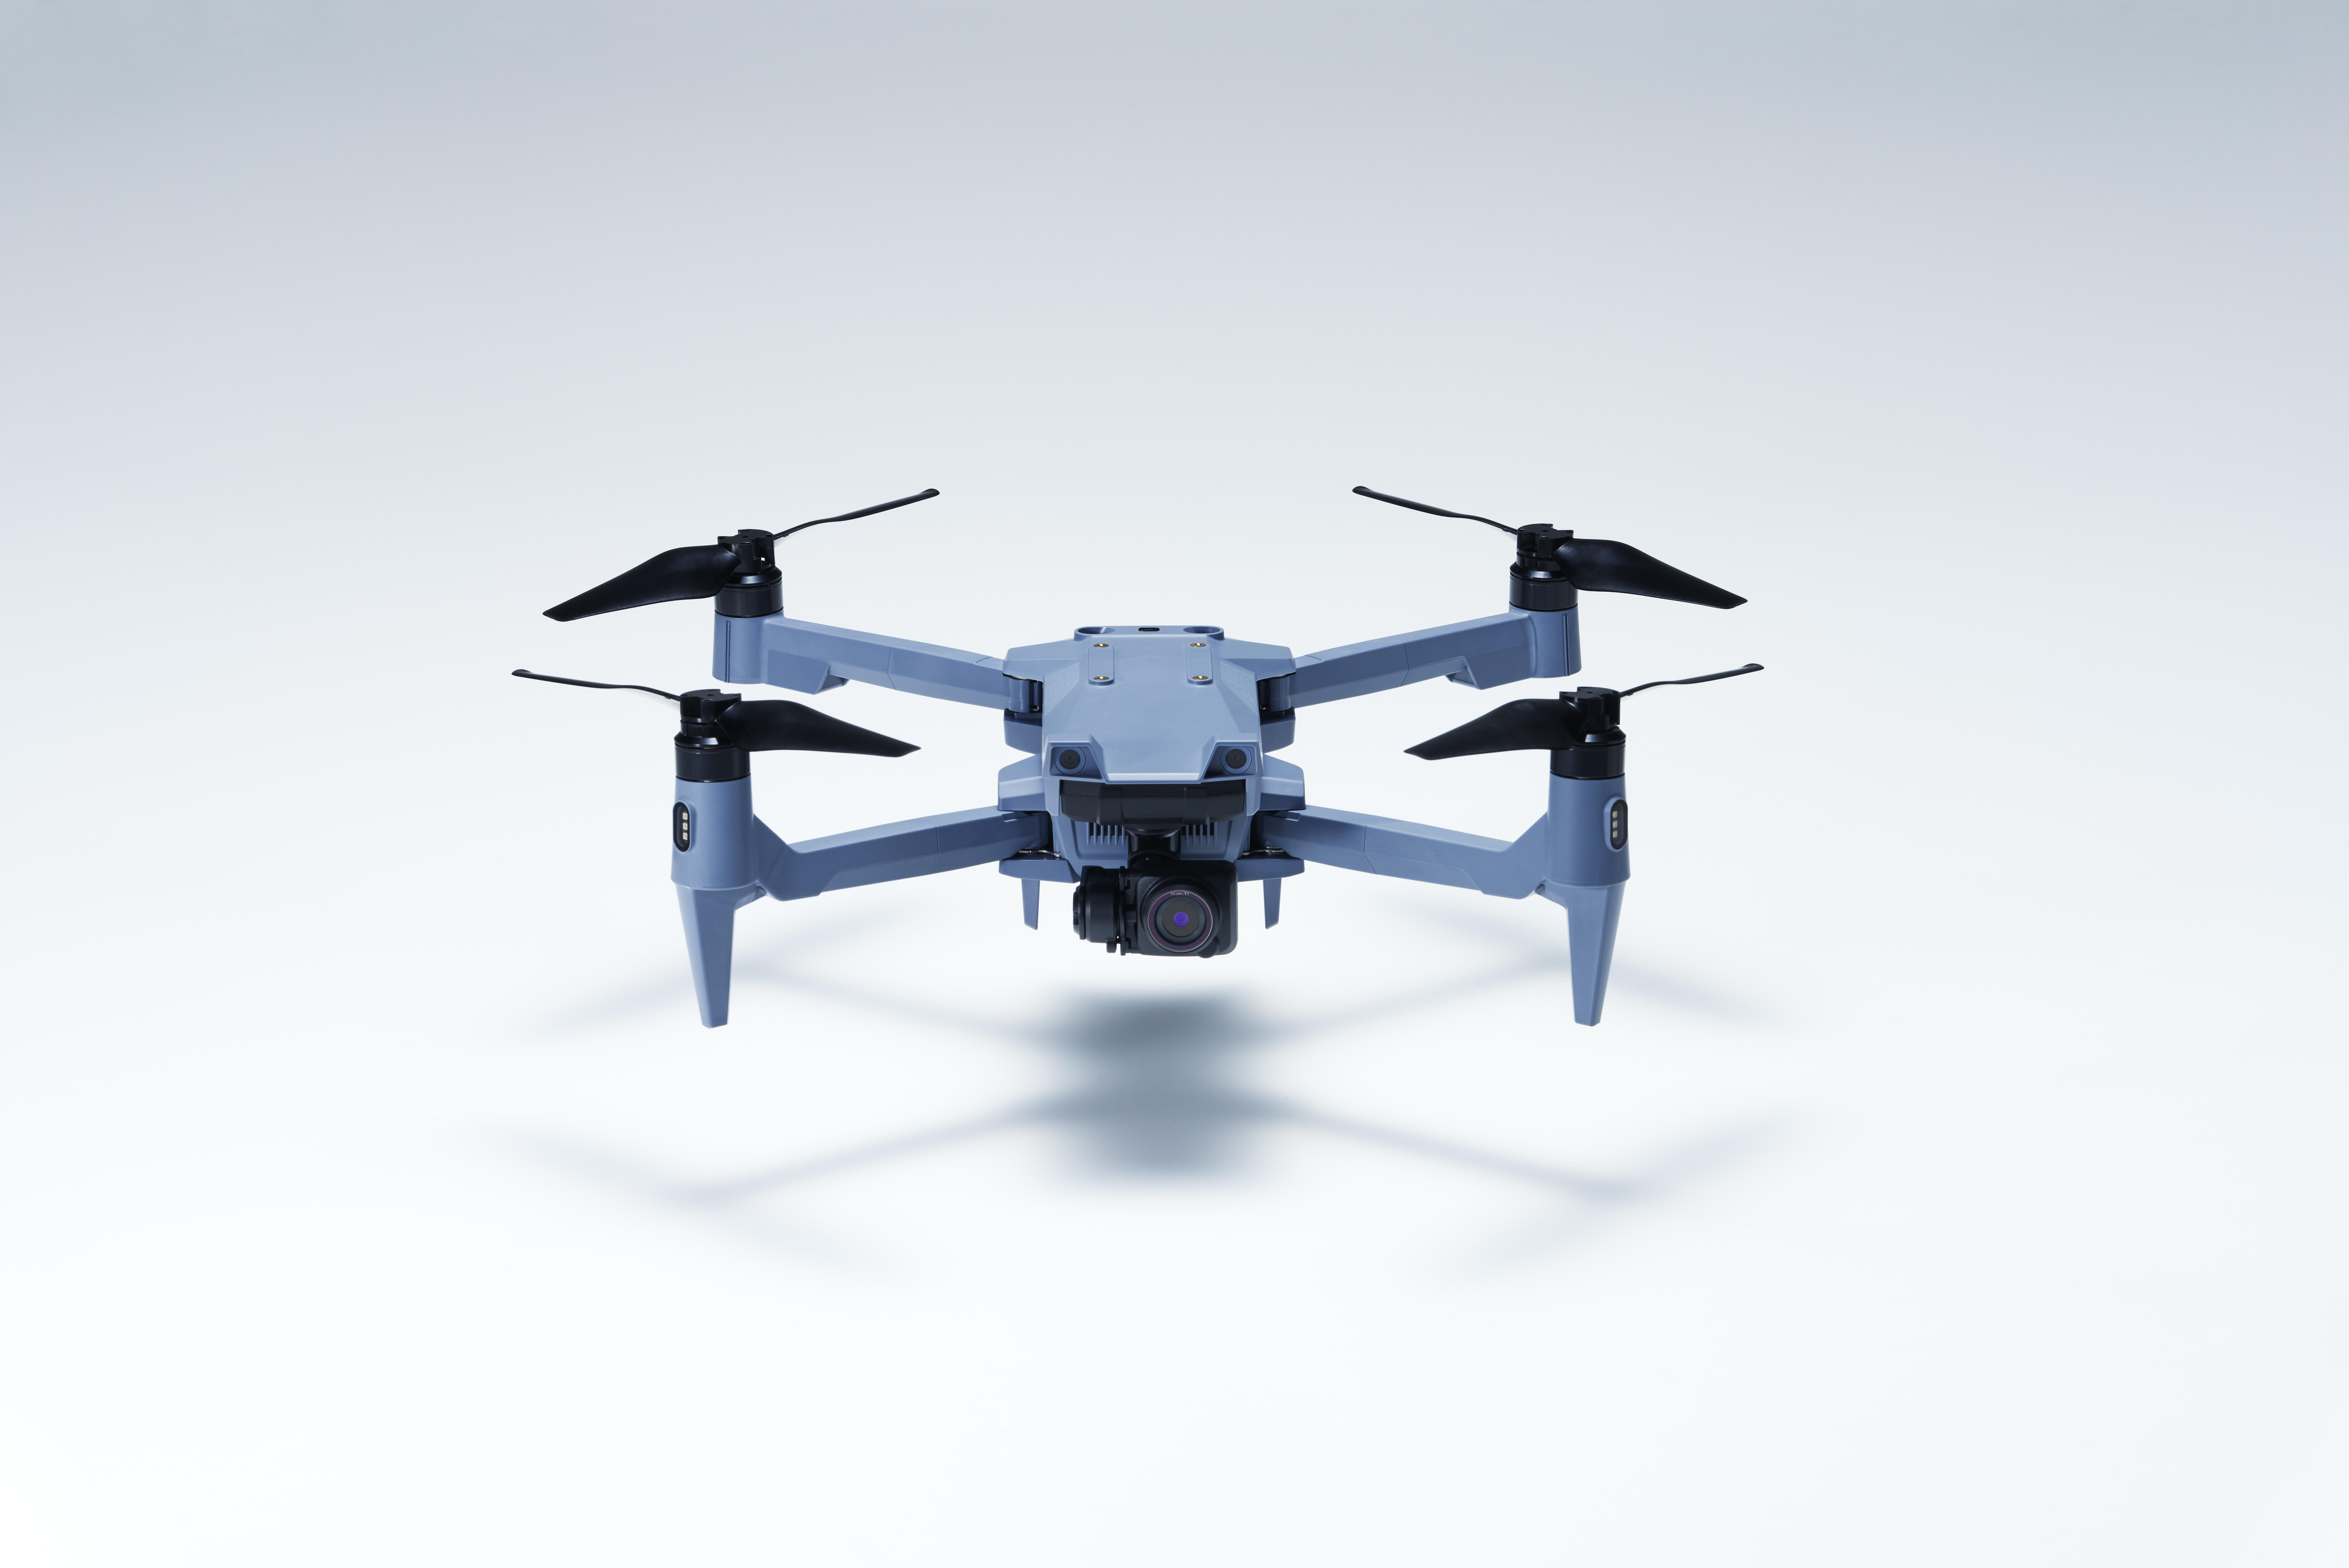 Japan’s Drone Industry, NEDO Lead the Way in ISO Collision Avoidance Standard Revision